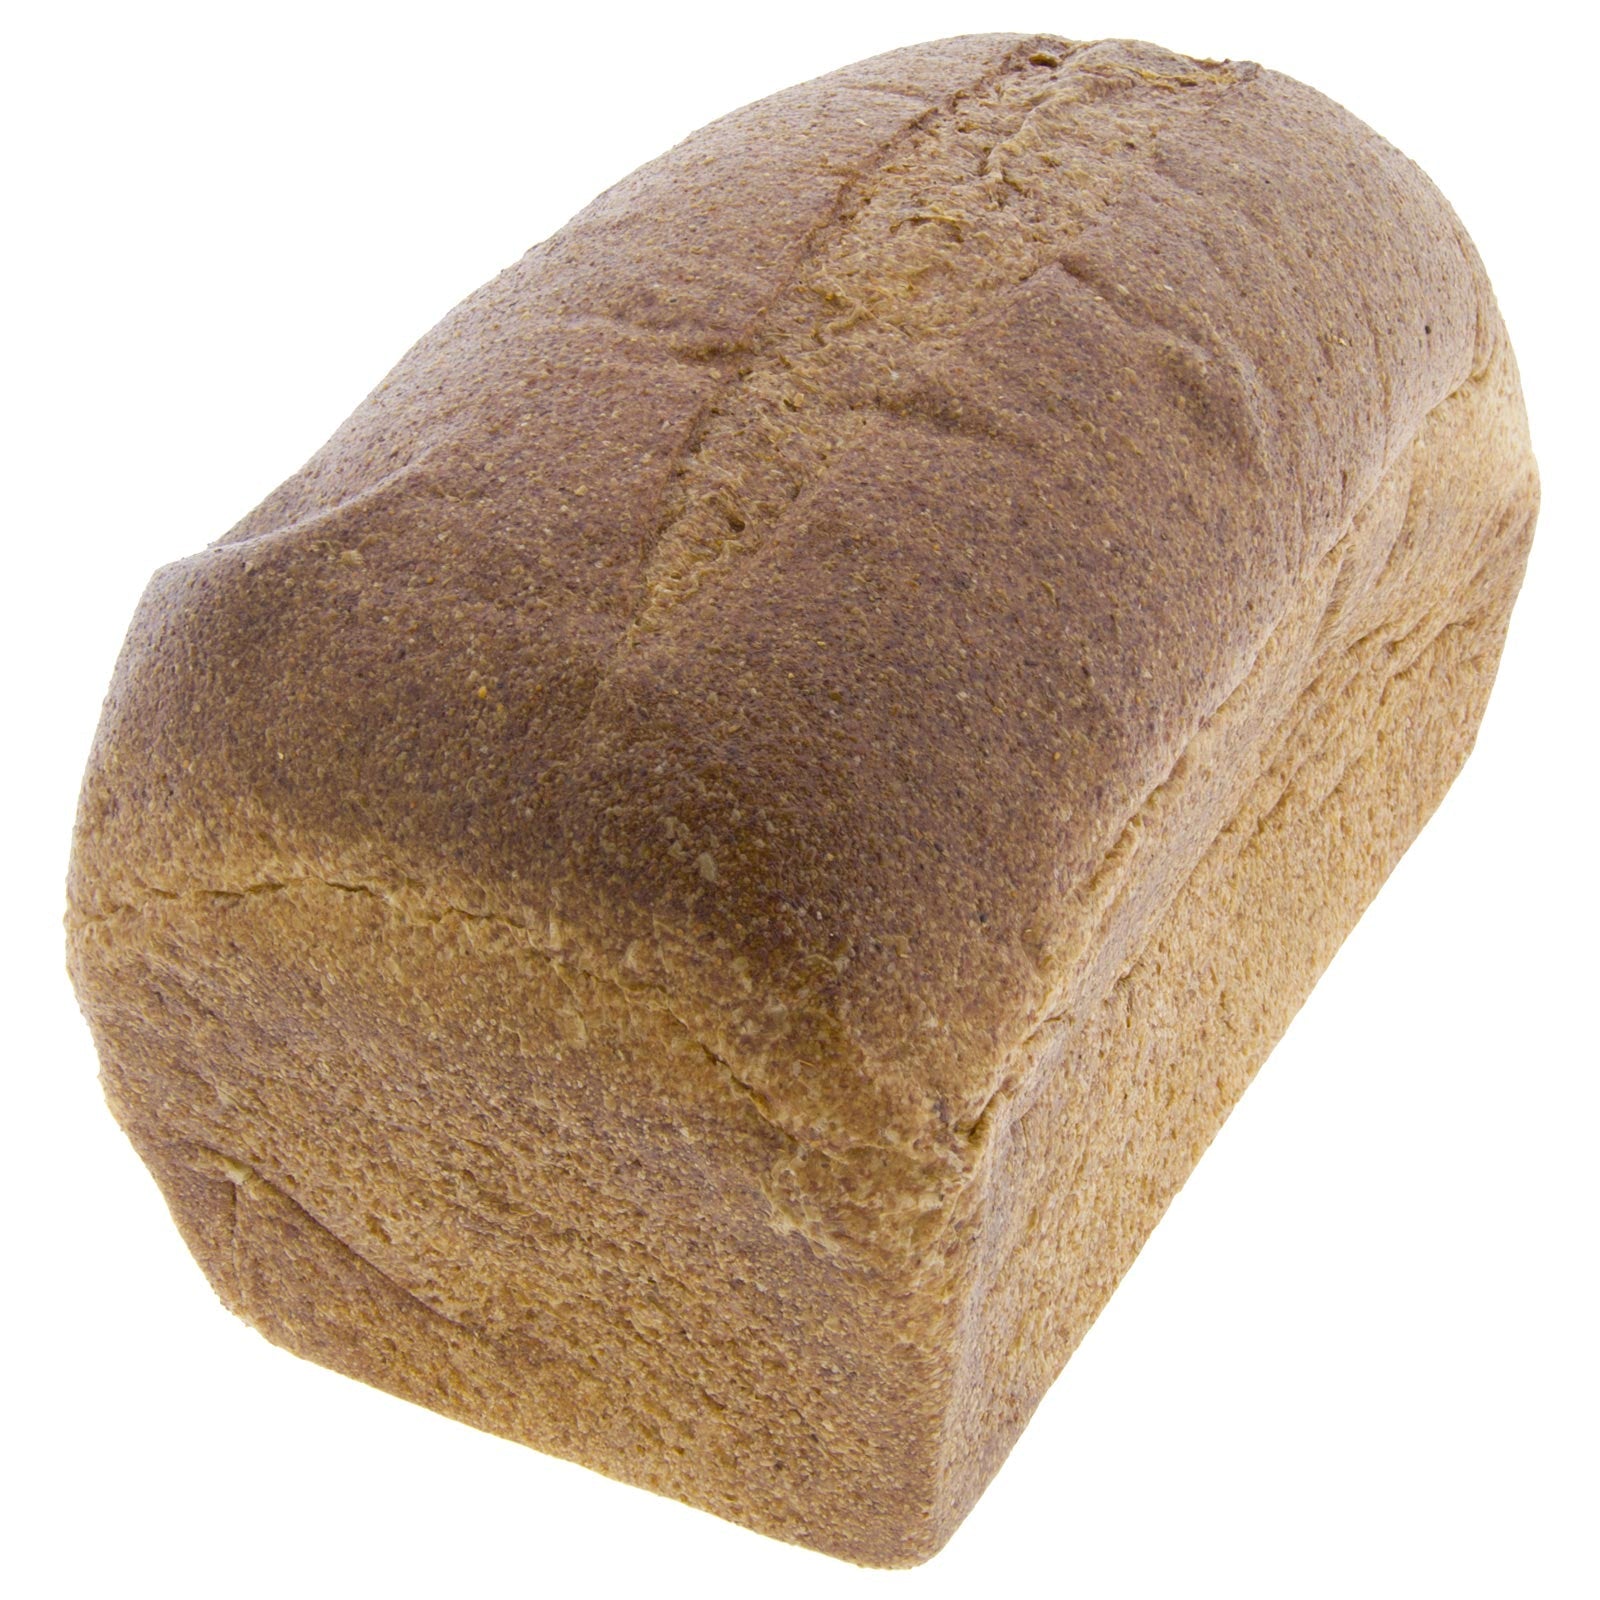 Integral rye mold bread without ecological salt (8 units x 400g) (uncut)